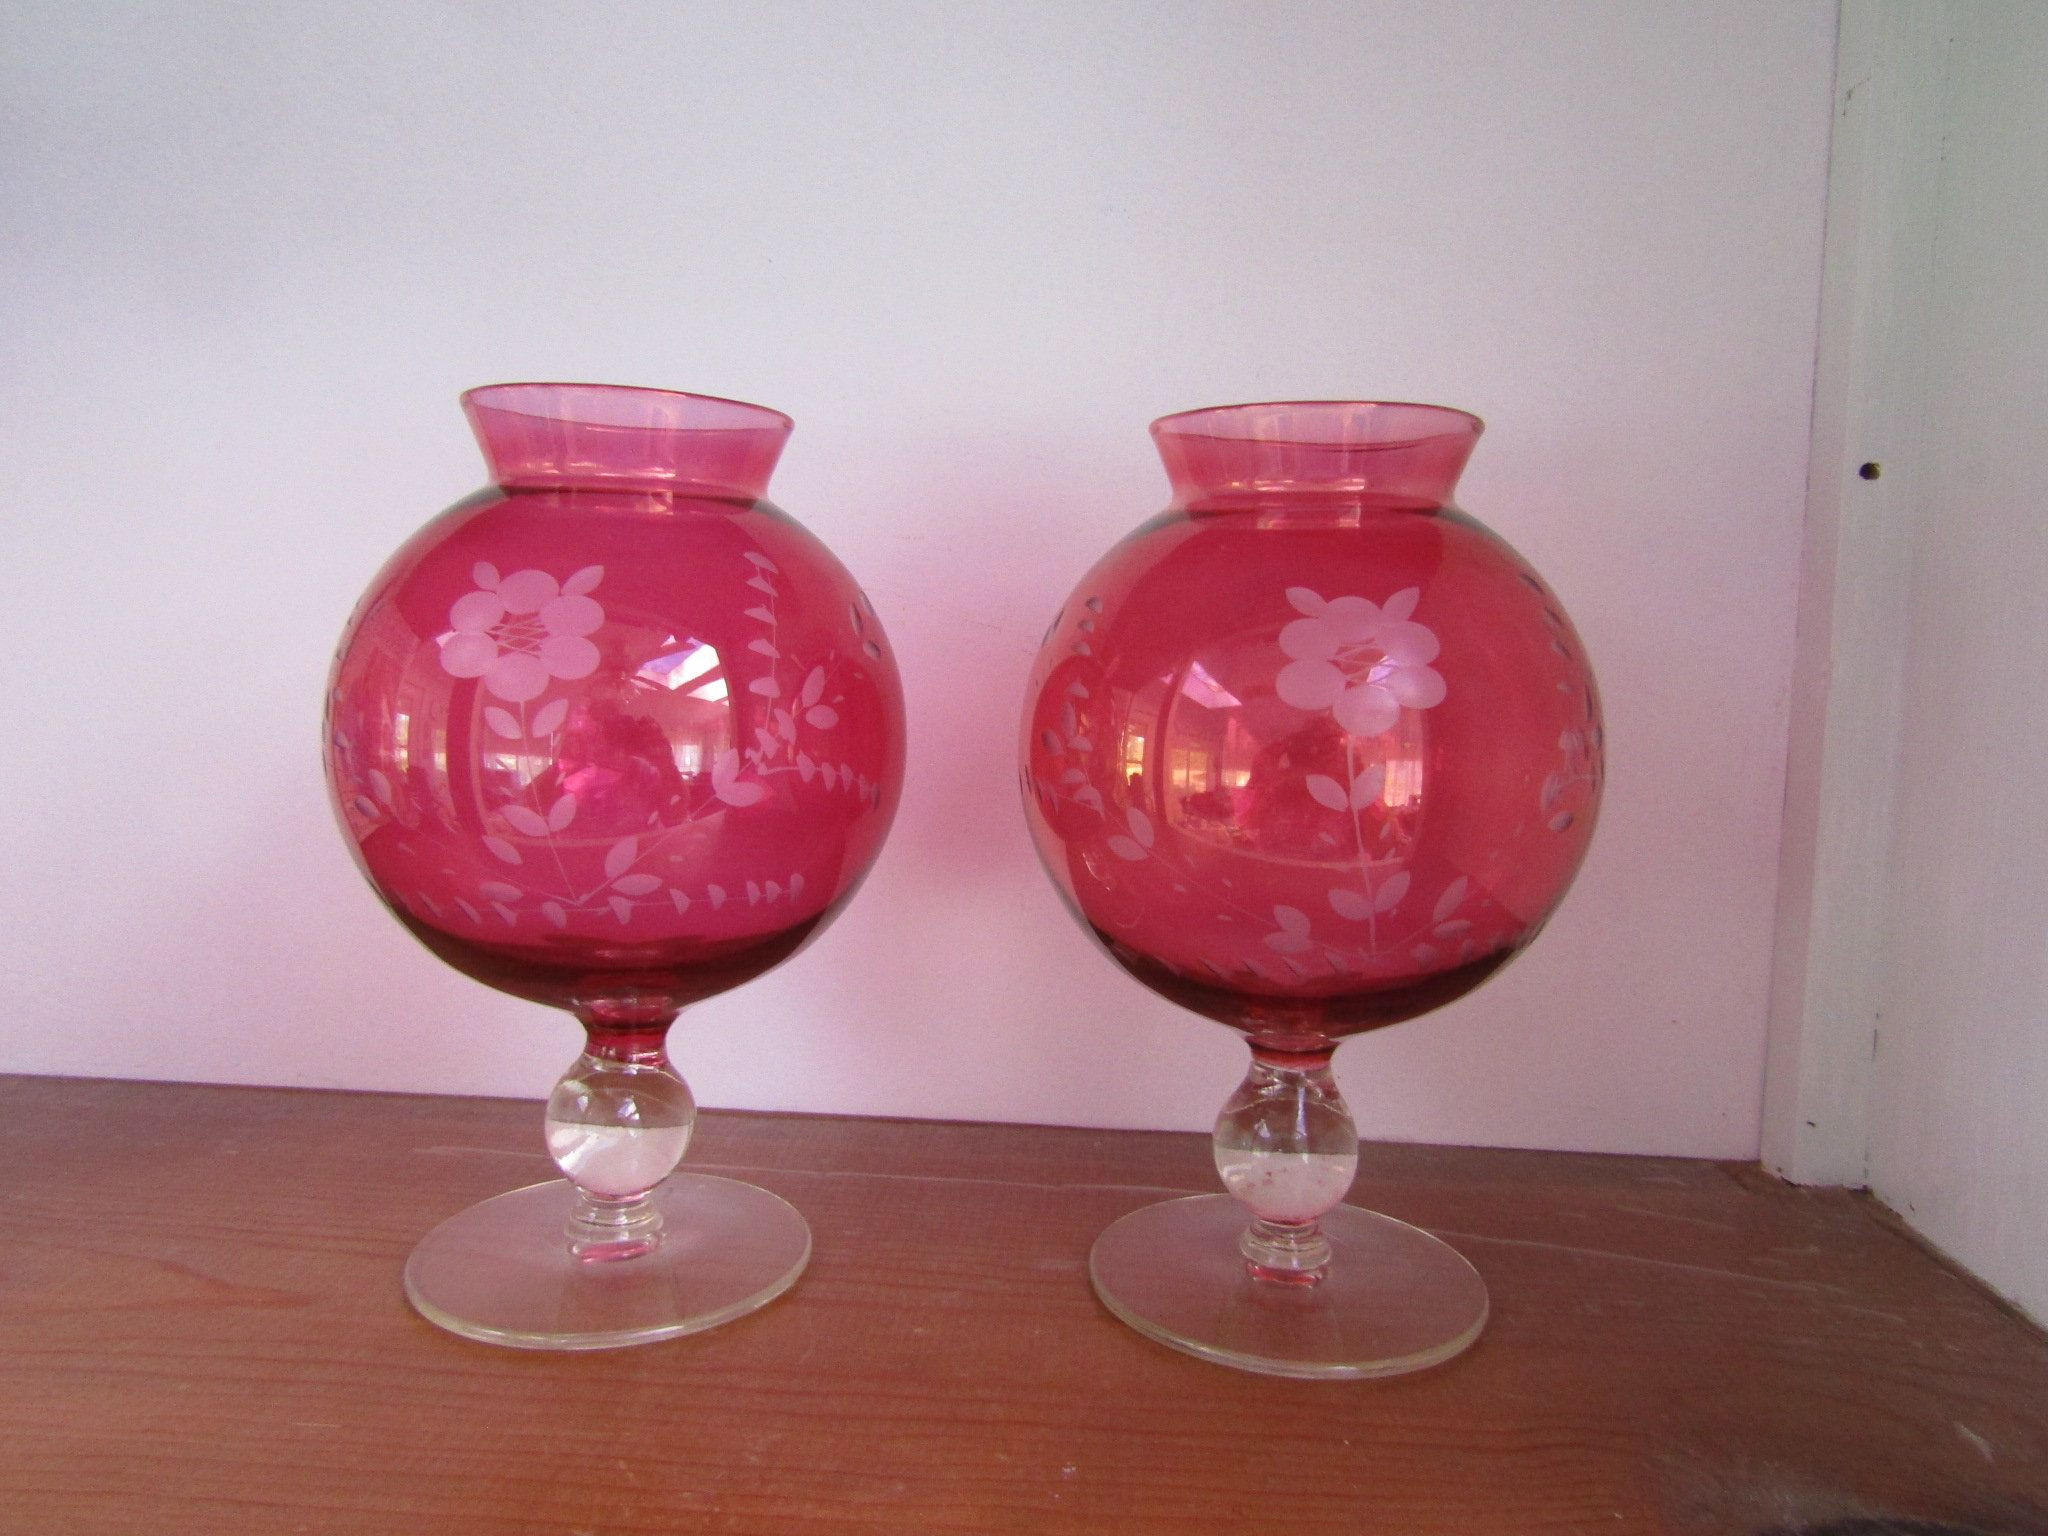 18 Wonderful Mikasa Florale 14 Inch Vase 2024 free download mikasa florale 14 inch vase of hello fall sale cranberry etched glass ball vases set of 2 floral for cranberry etched glass ball vases set of 2 floral etching vintage items